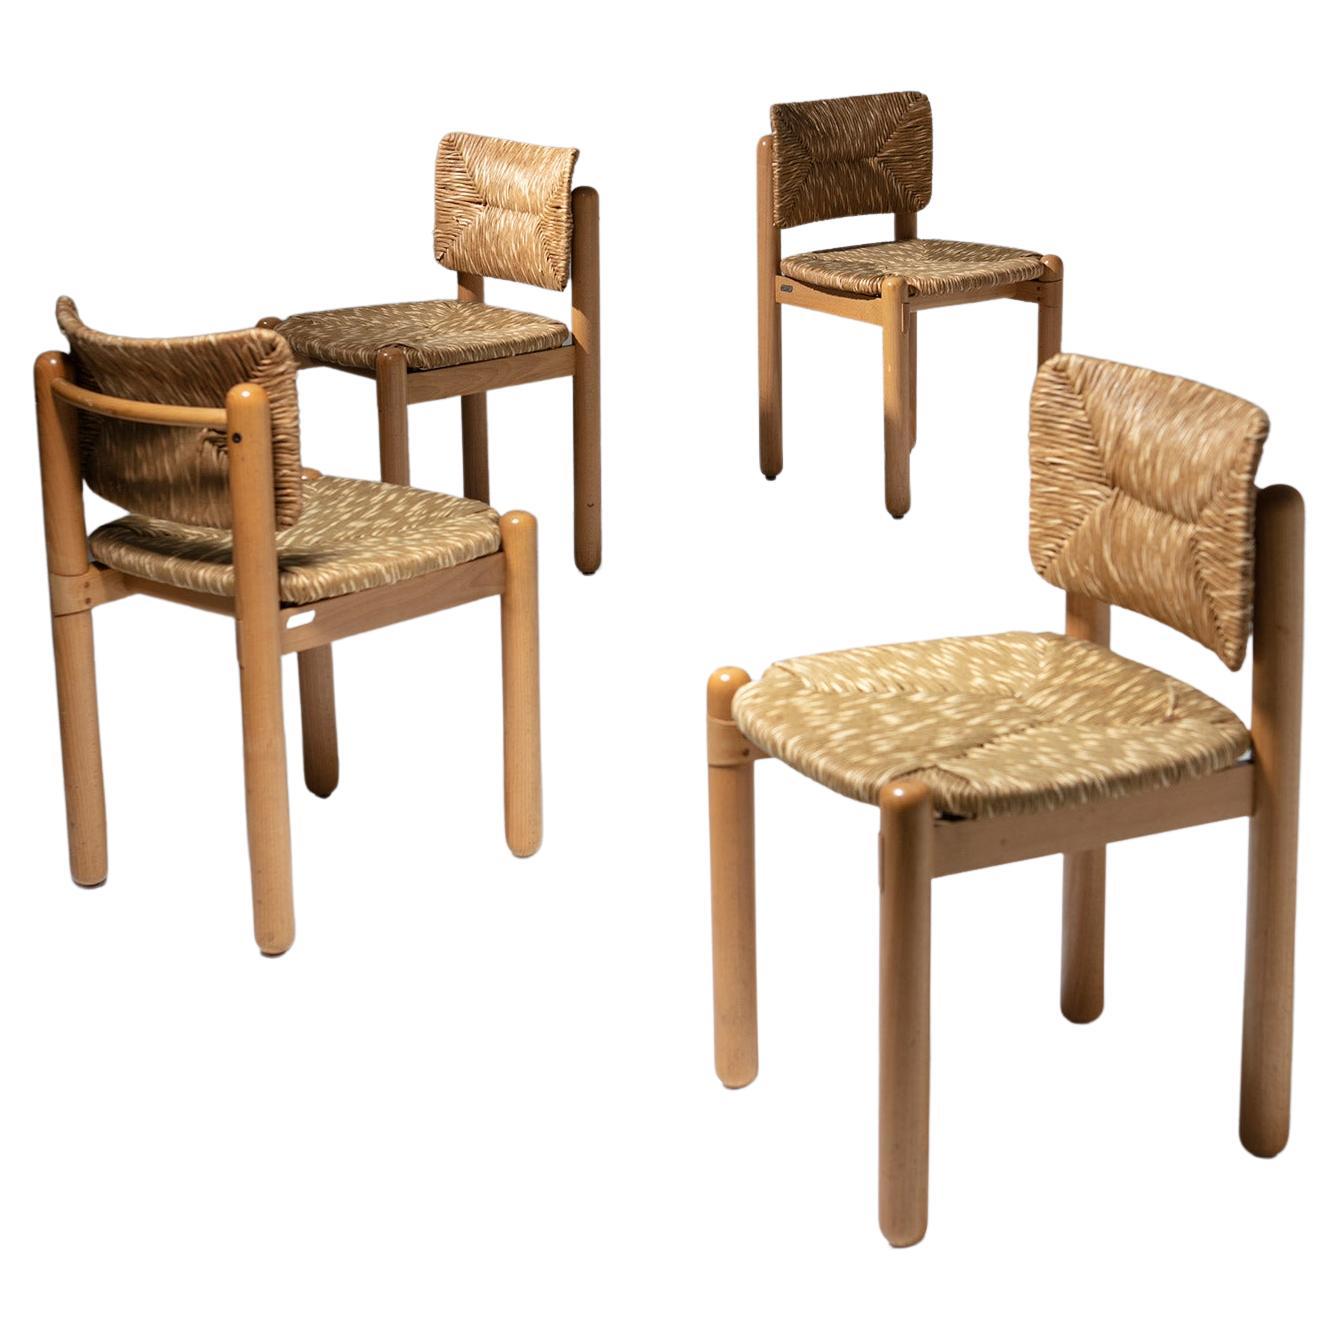 Set of Four Baba Wood Chairs by Assostudio for Pozzi & Verga, Italy, 1980s